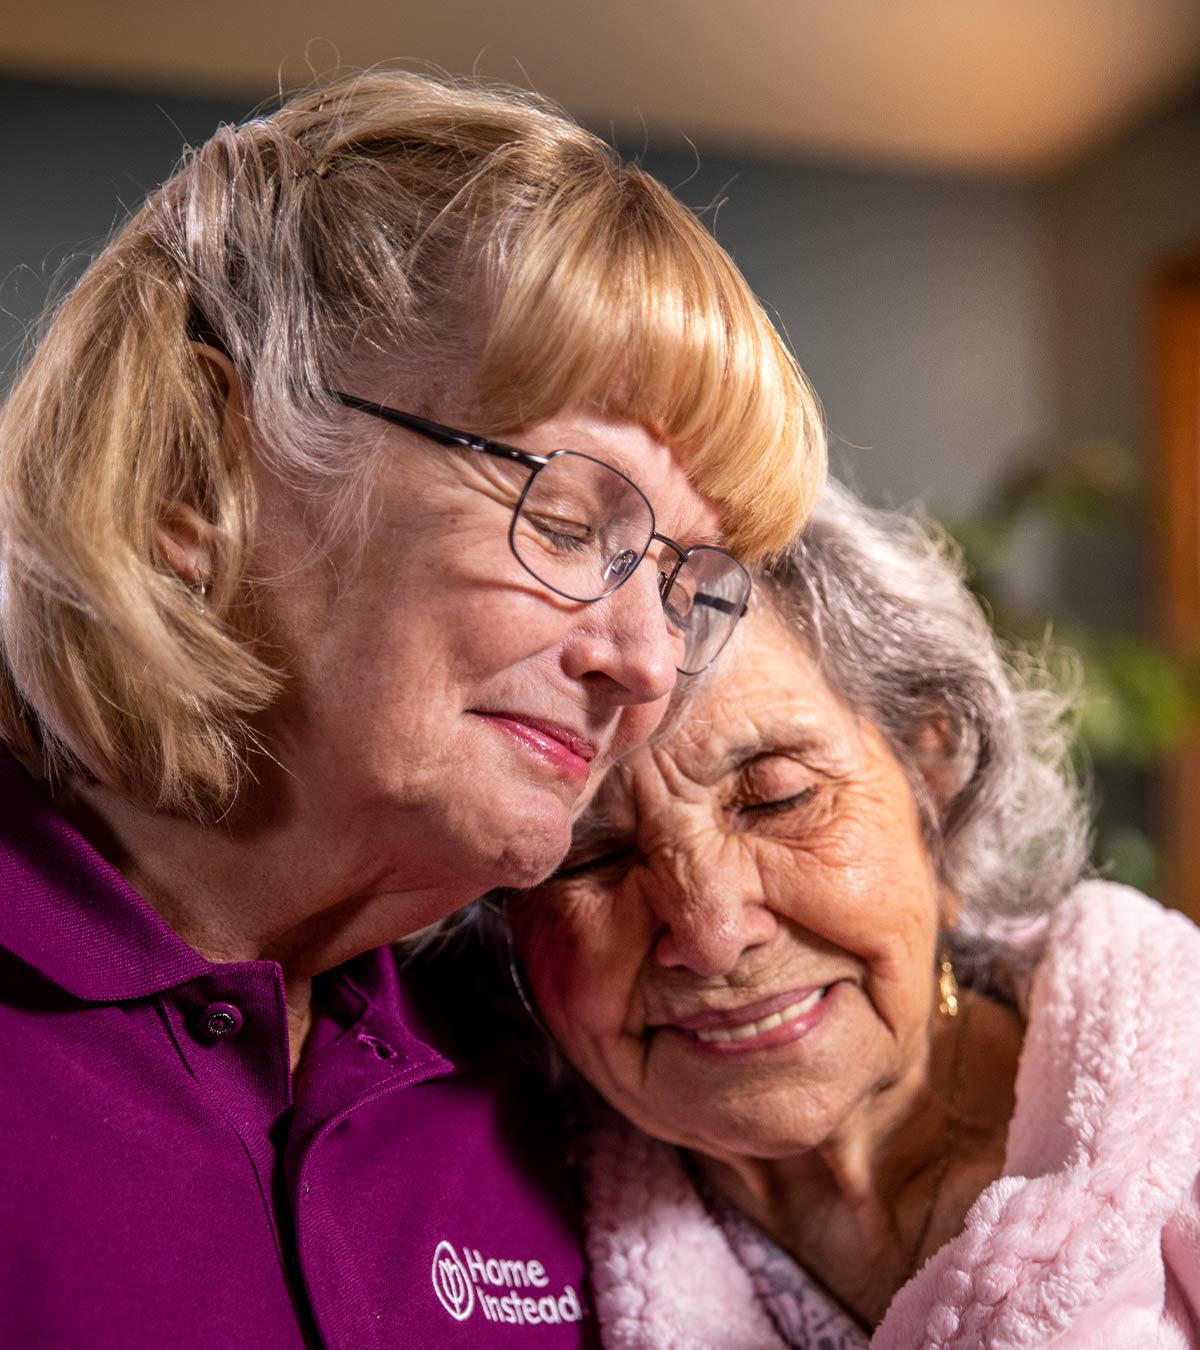 CAREGiver providing in-home senior care services. Home Instead of Bozeman, MT provides Elder Care to aging adults. 